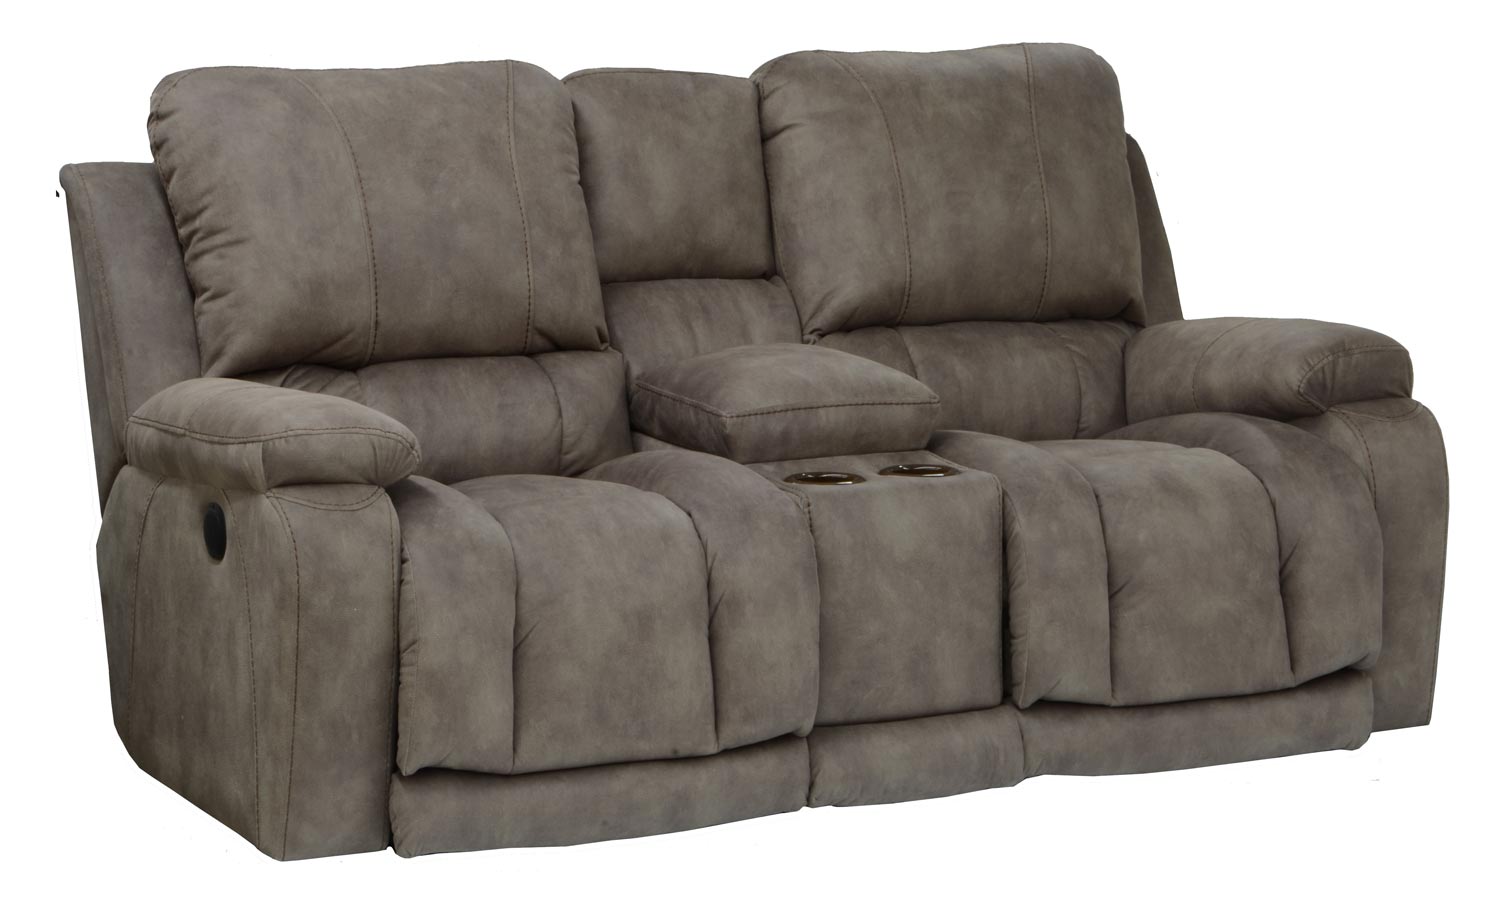 CatNapper Cosmopolitan Power Lay Flat Reclining Console Loveseat with Storage and Cupholders and X-tra Comfort Footrest - Pecan